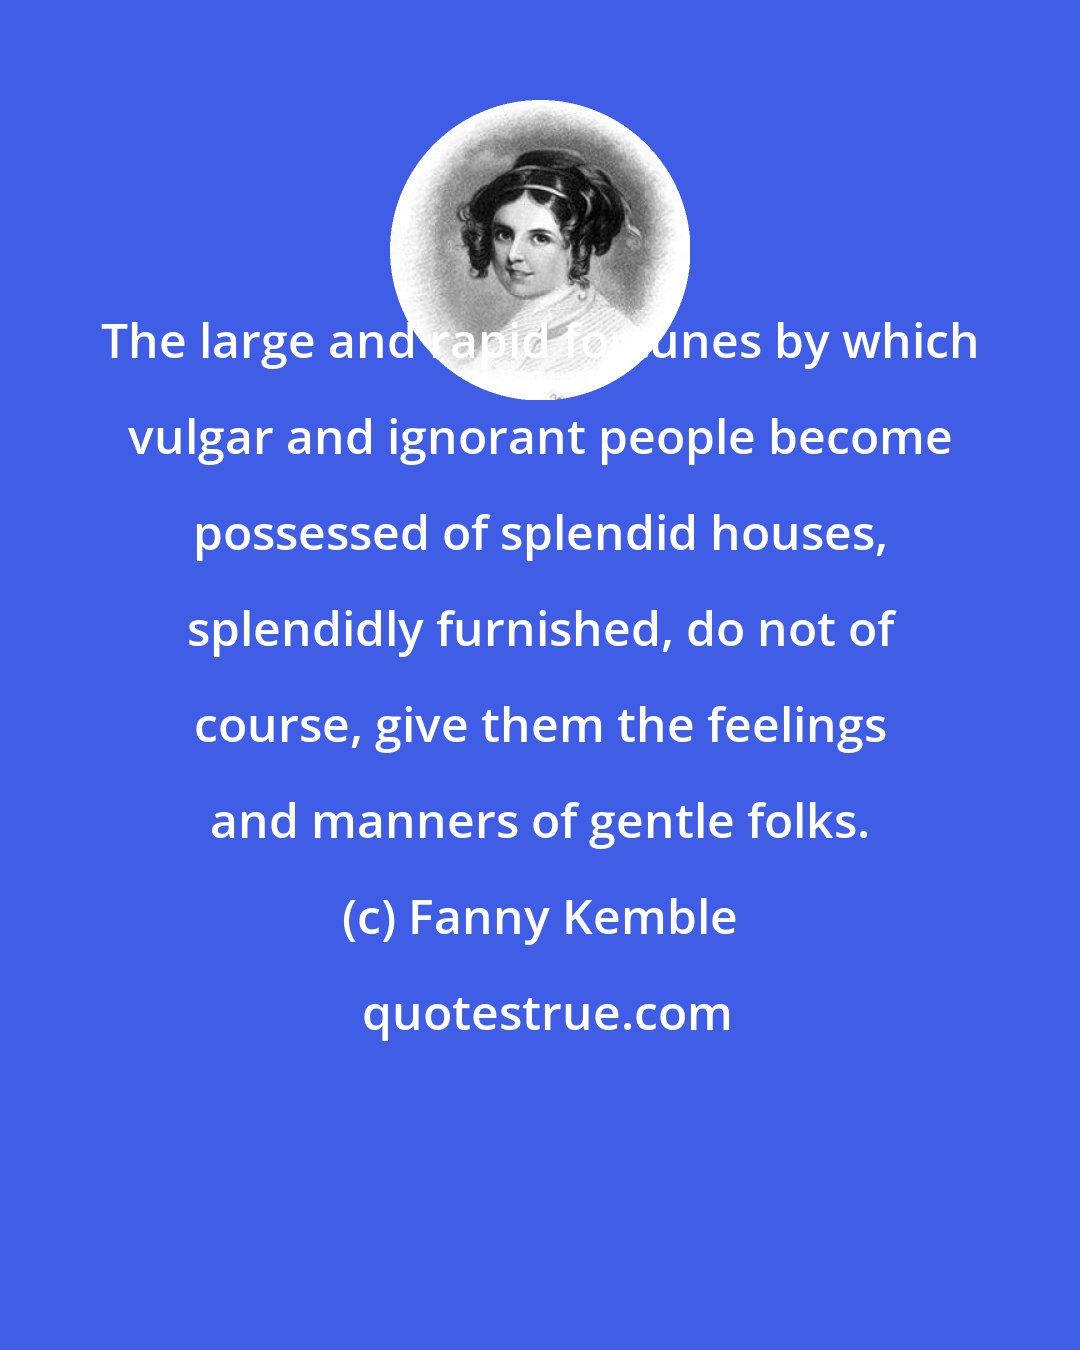 Fanny Kemble: The large and rapid fortunes by which vulgar and ignorant people become possessed of splendid houses, splendidly furnished, do not of course, give them the feelings and manners of gentle folks.